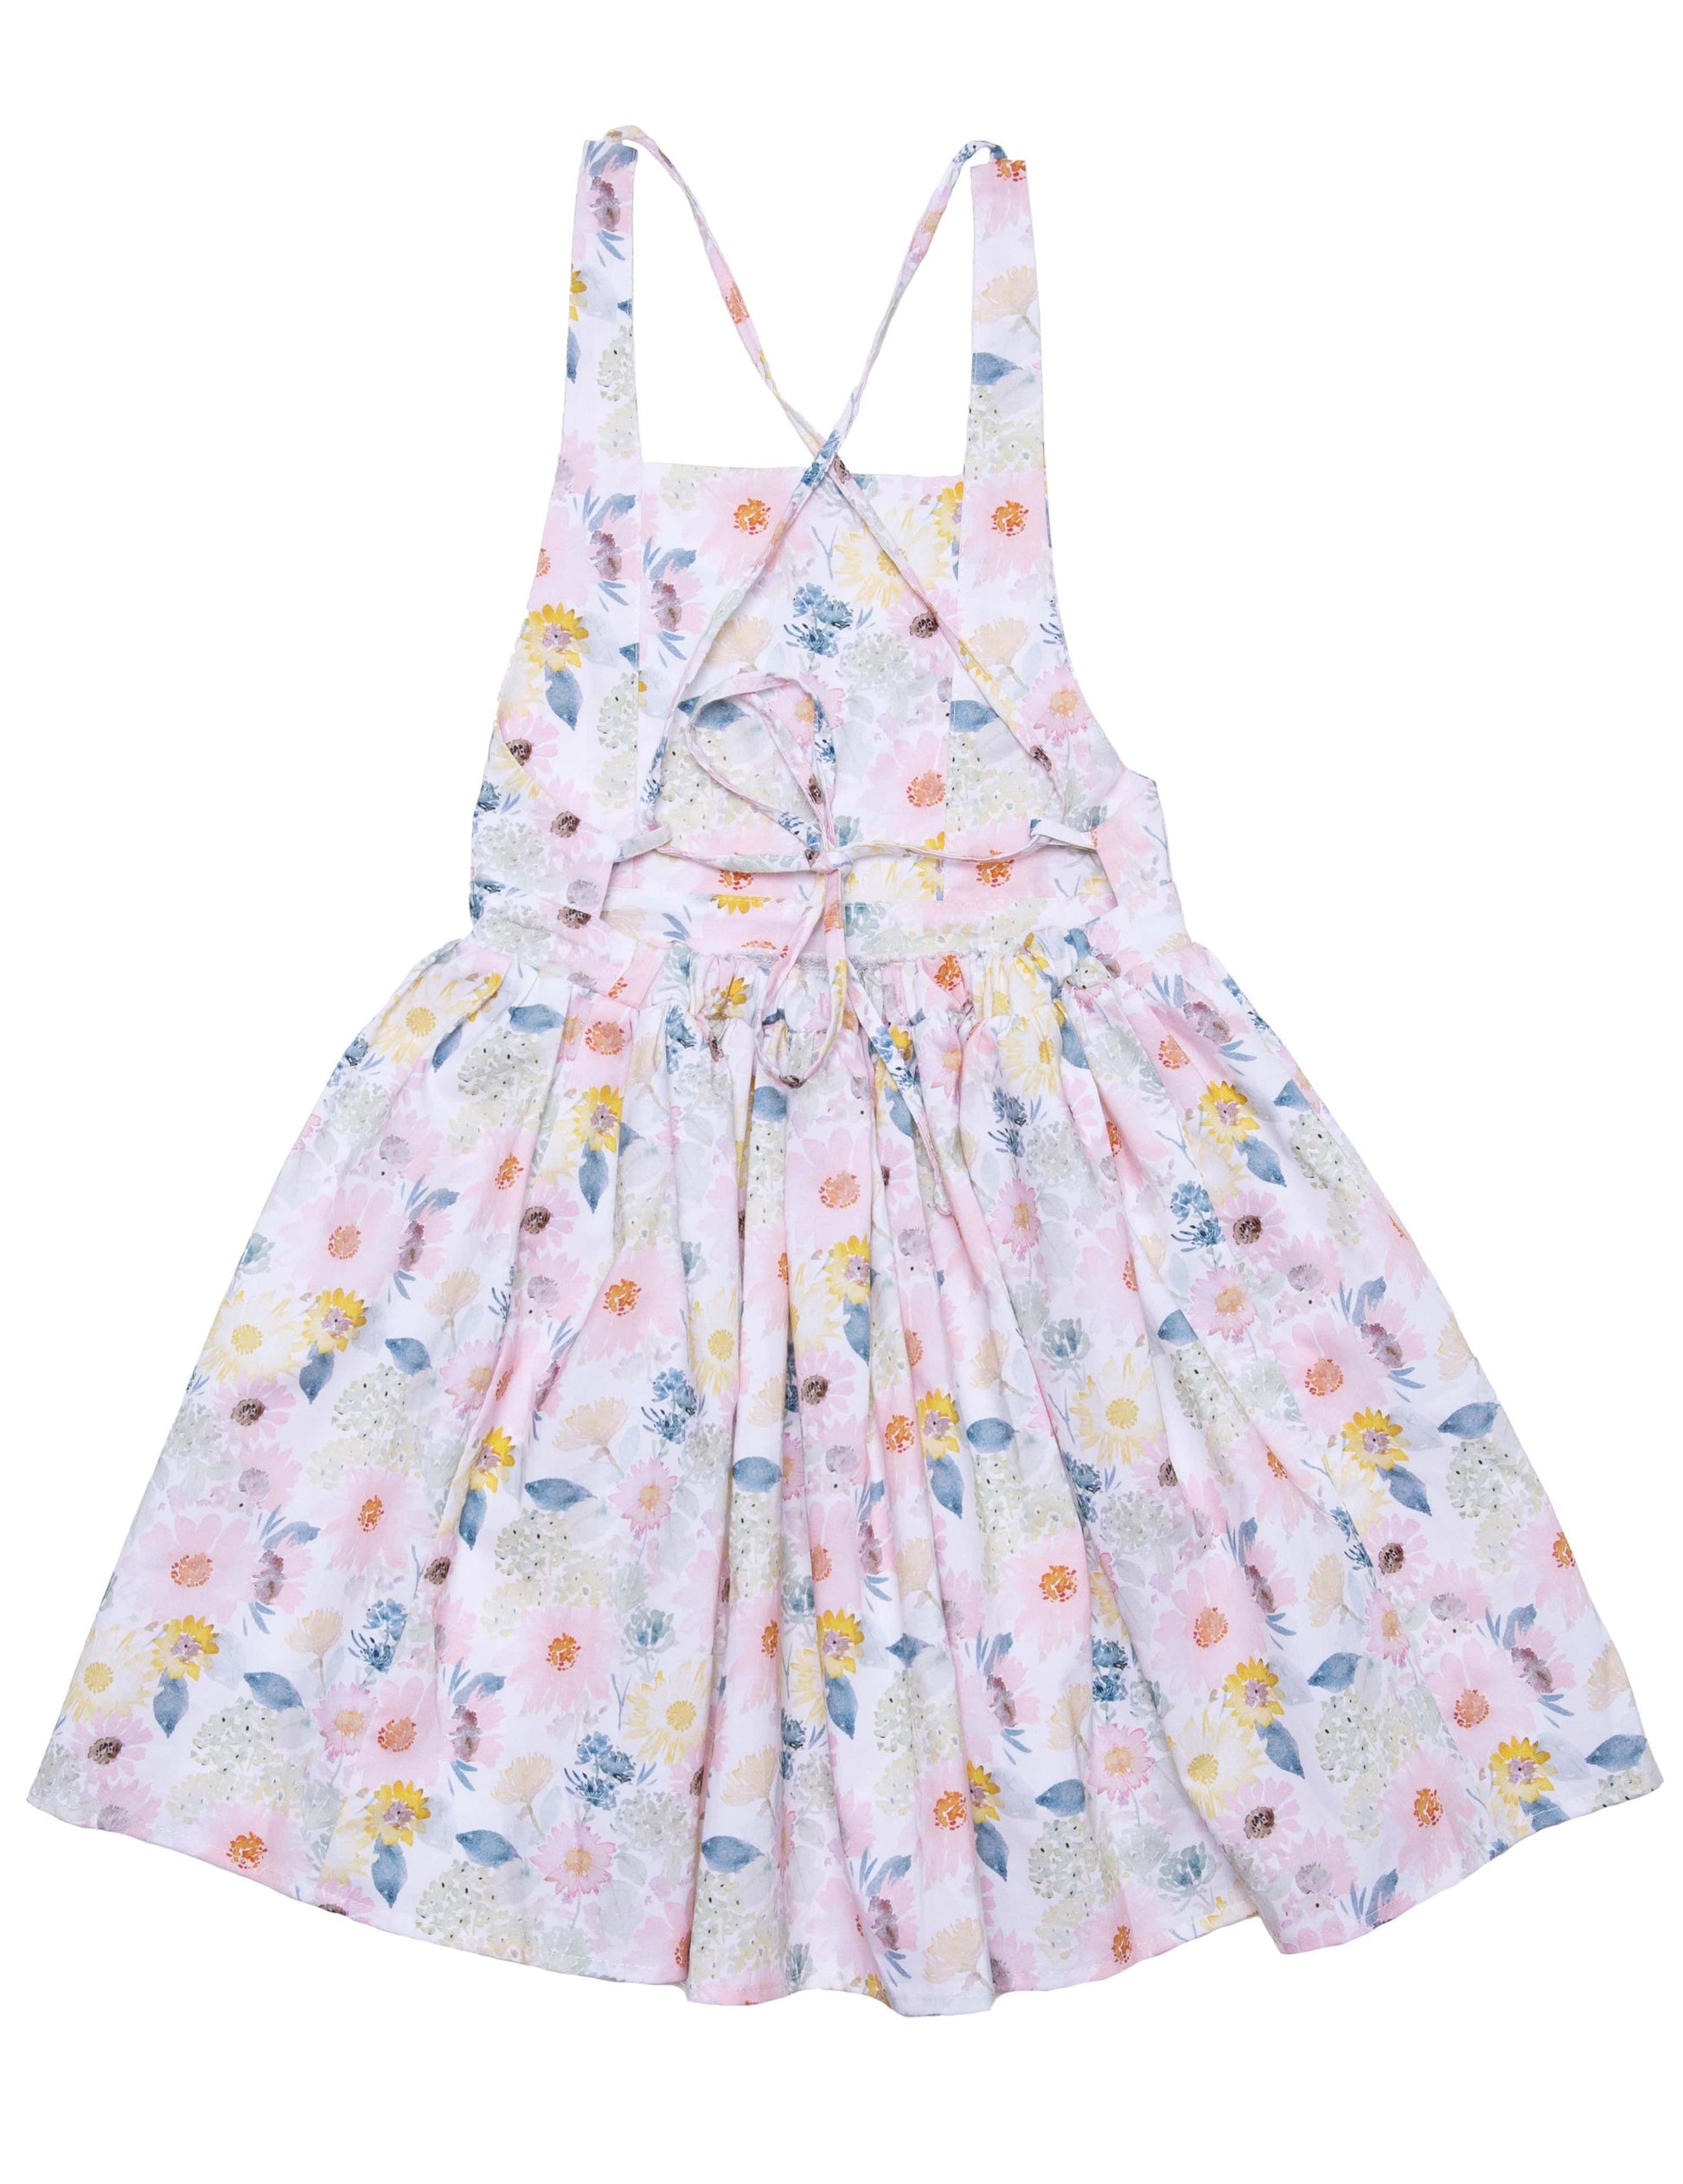 Worthy Threads Blooming Tie Back Dress